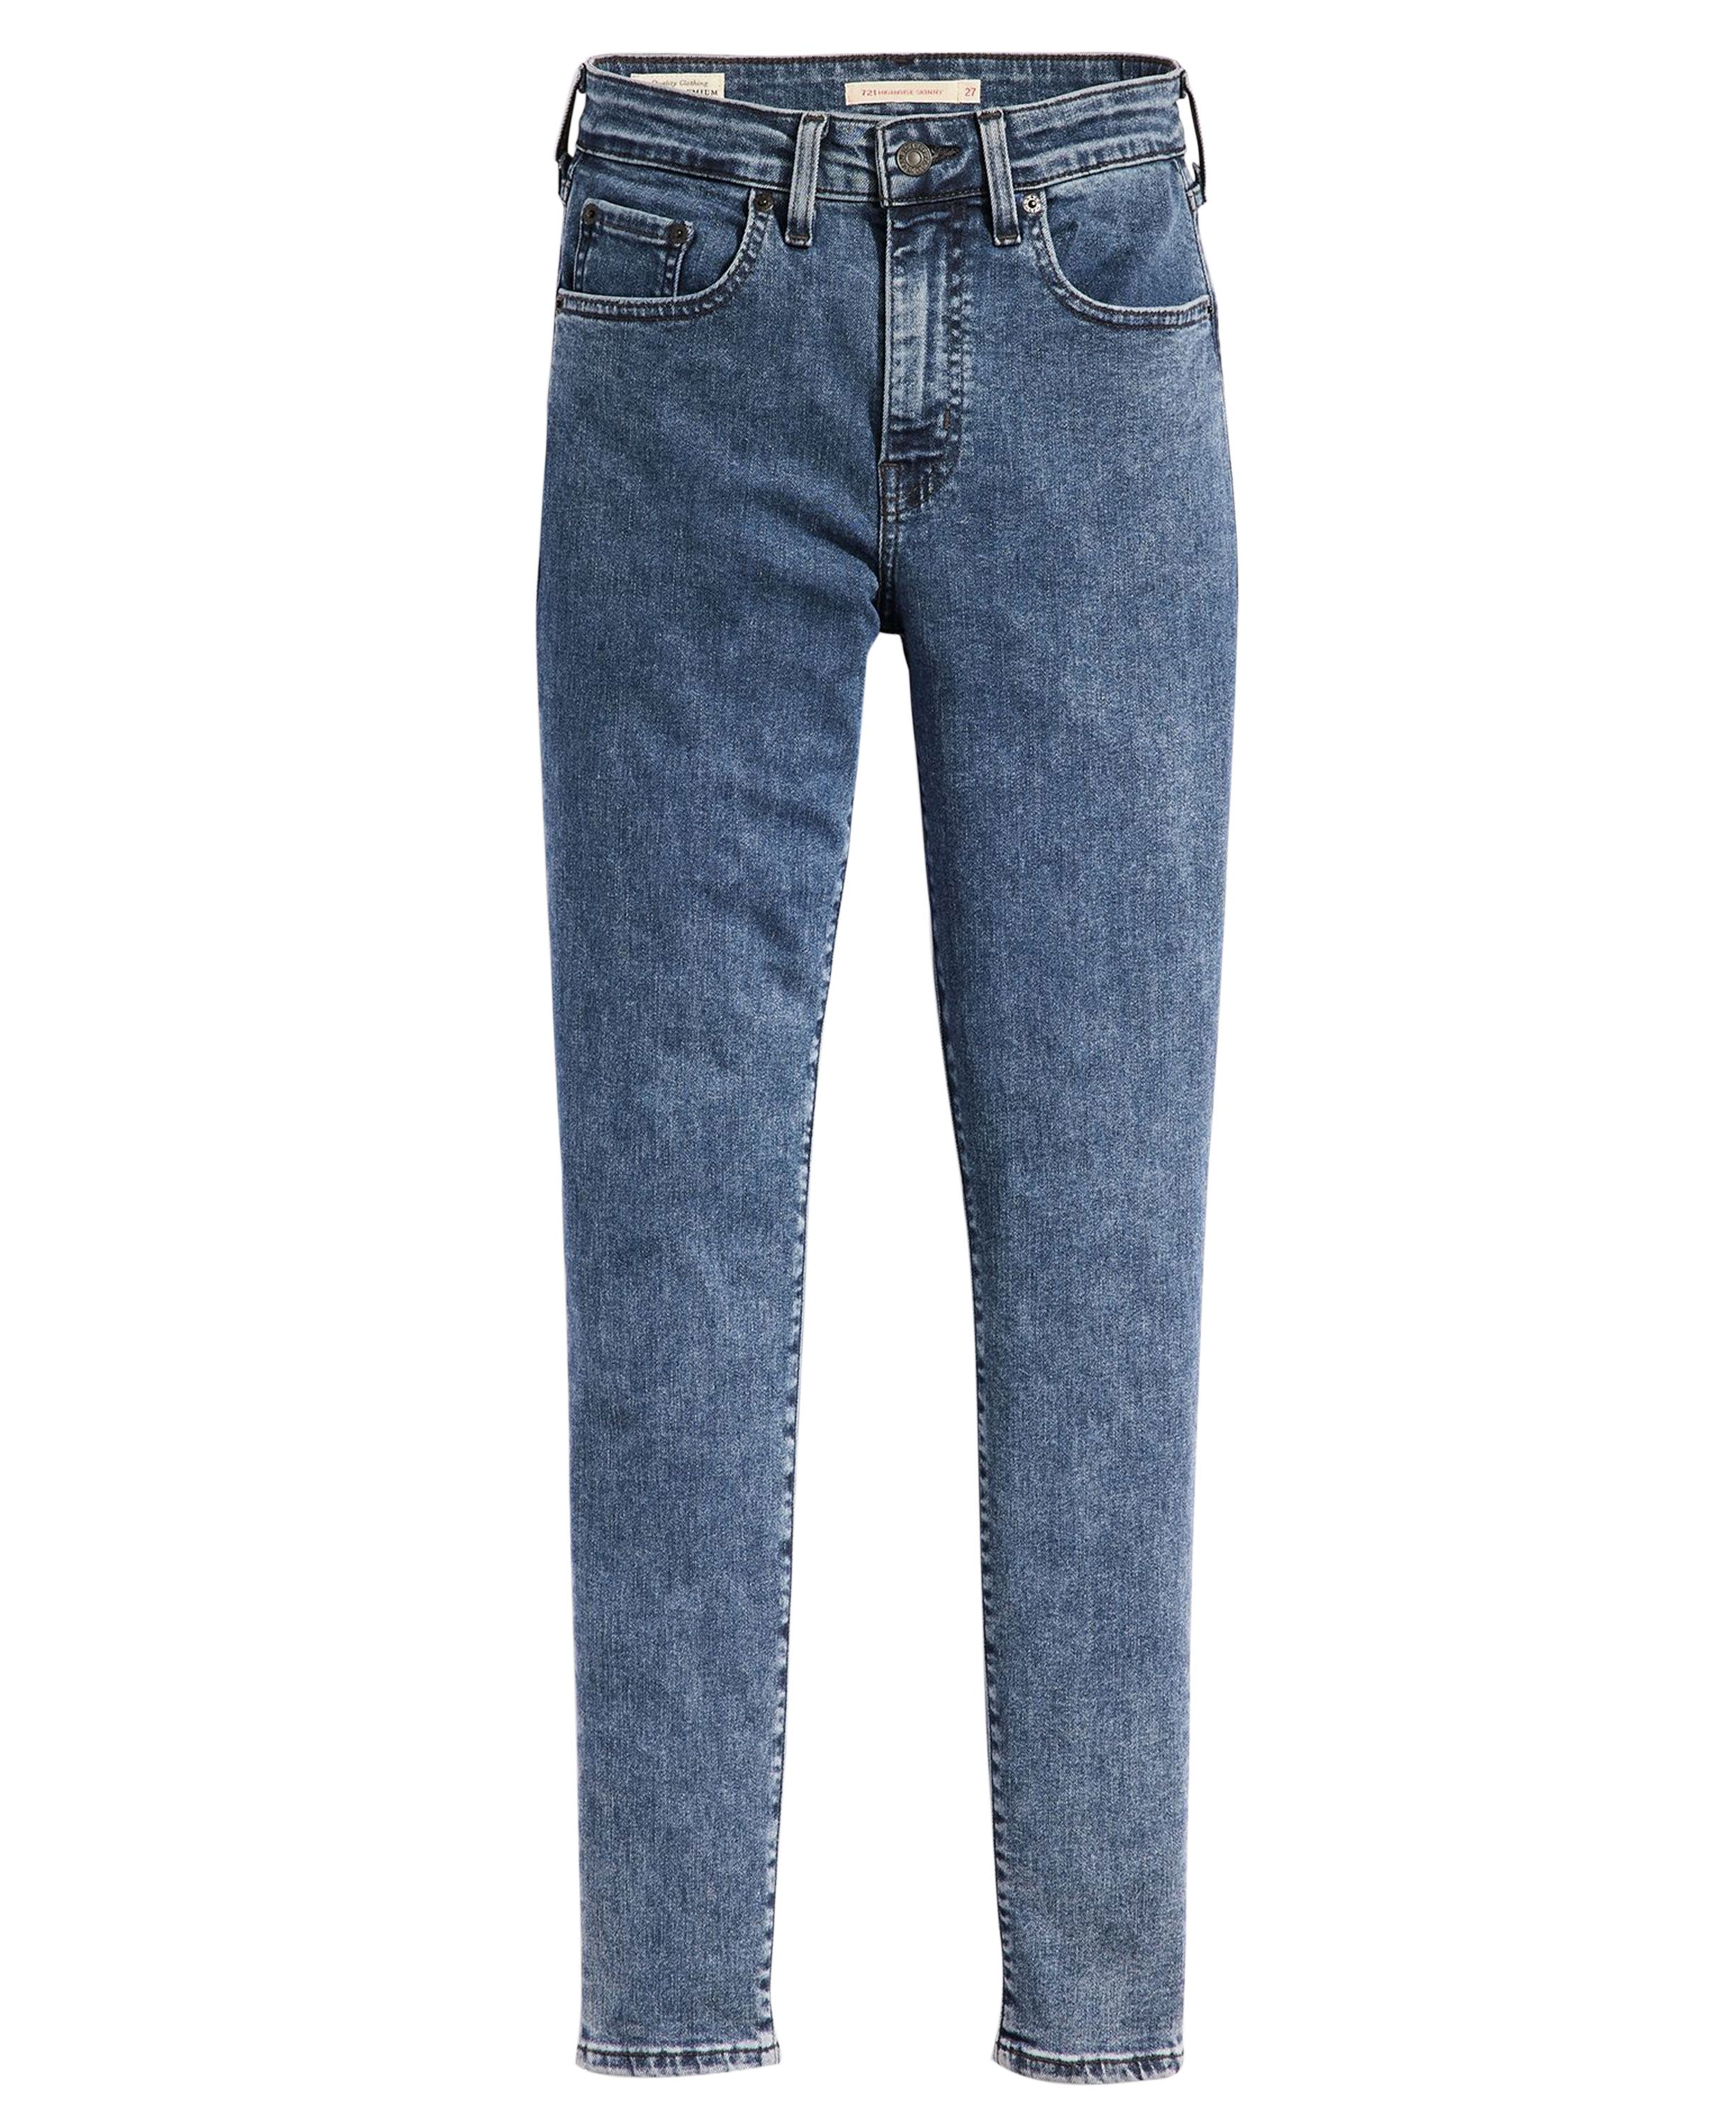 Landmark  Levi's 721® High Rise Skinny Jeans in Playing The Field